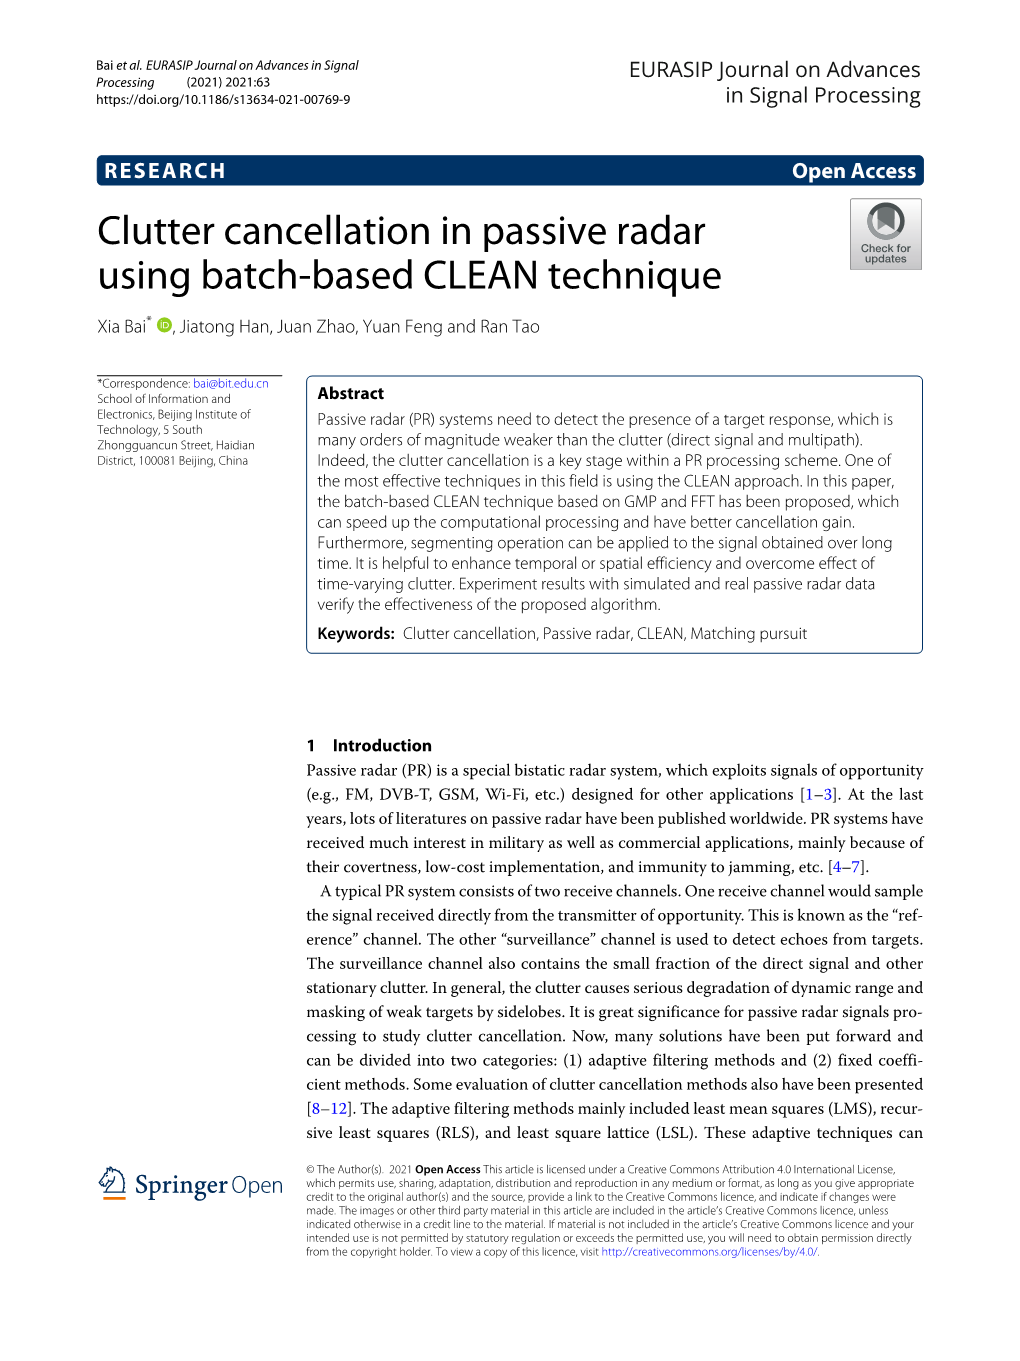 Clutter Cancellation in Passive Radar Using Batch-Based CLEAN Technique